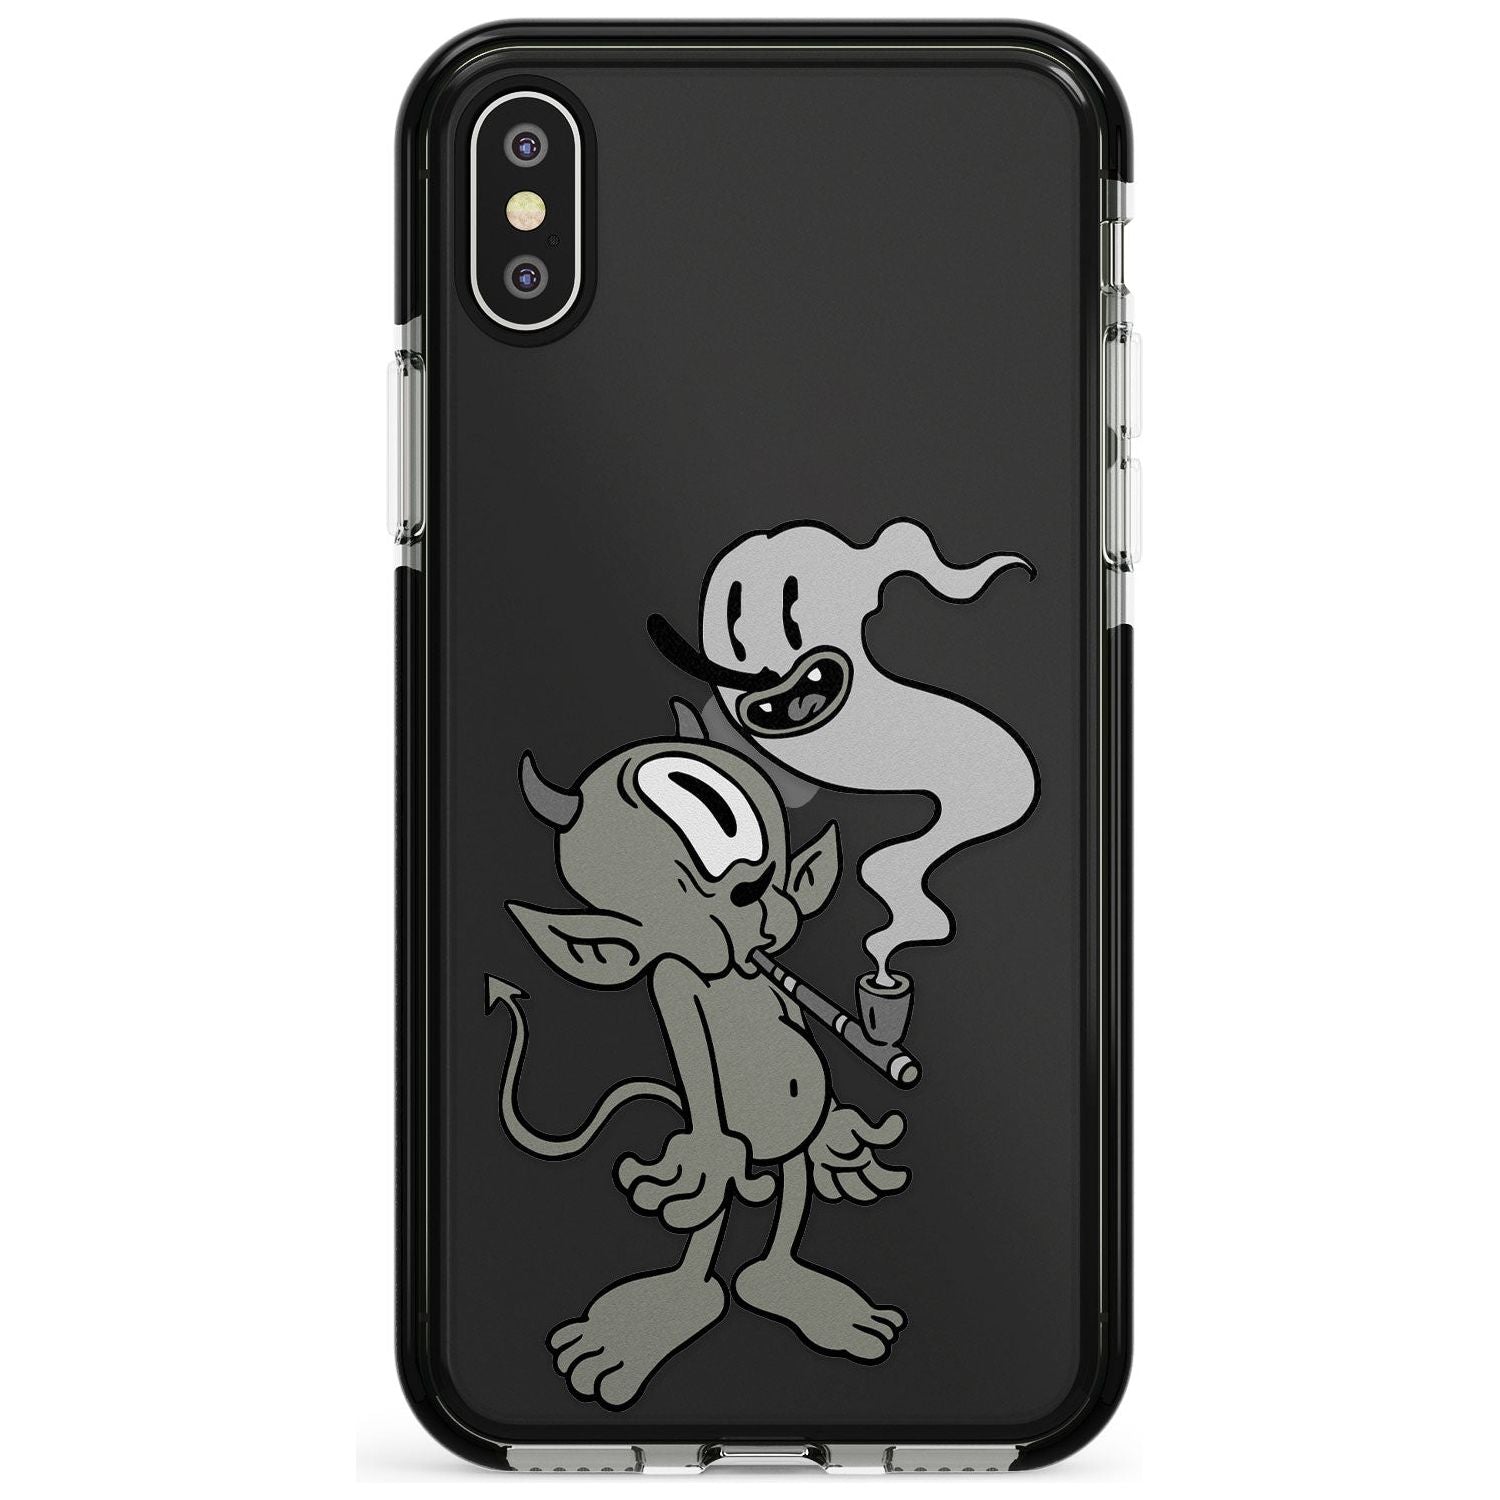 Pipe Goblin Black Impact Phone Case for iPhone X XS Max XR